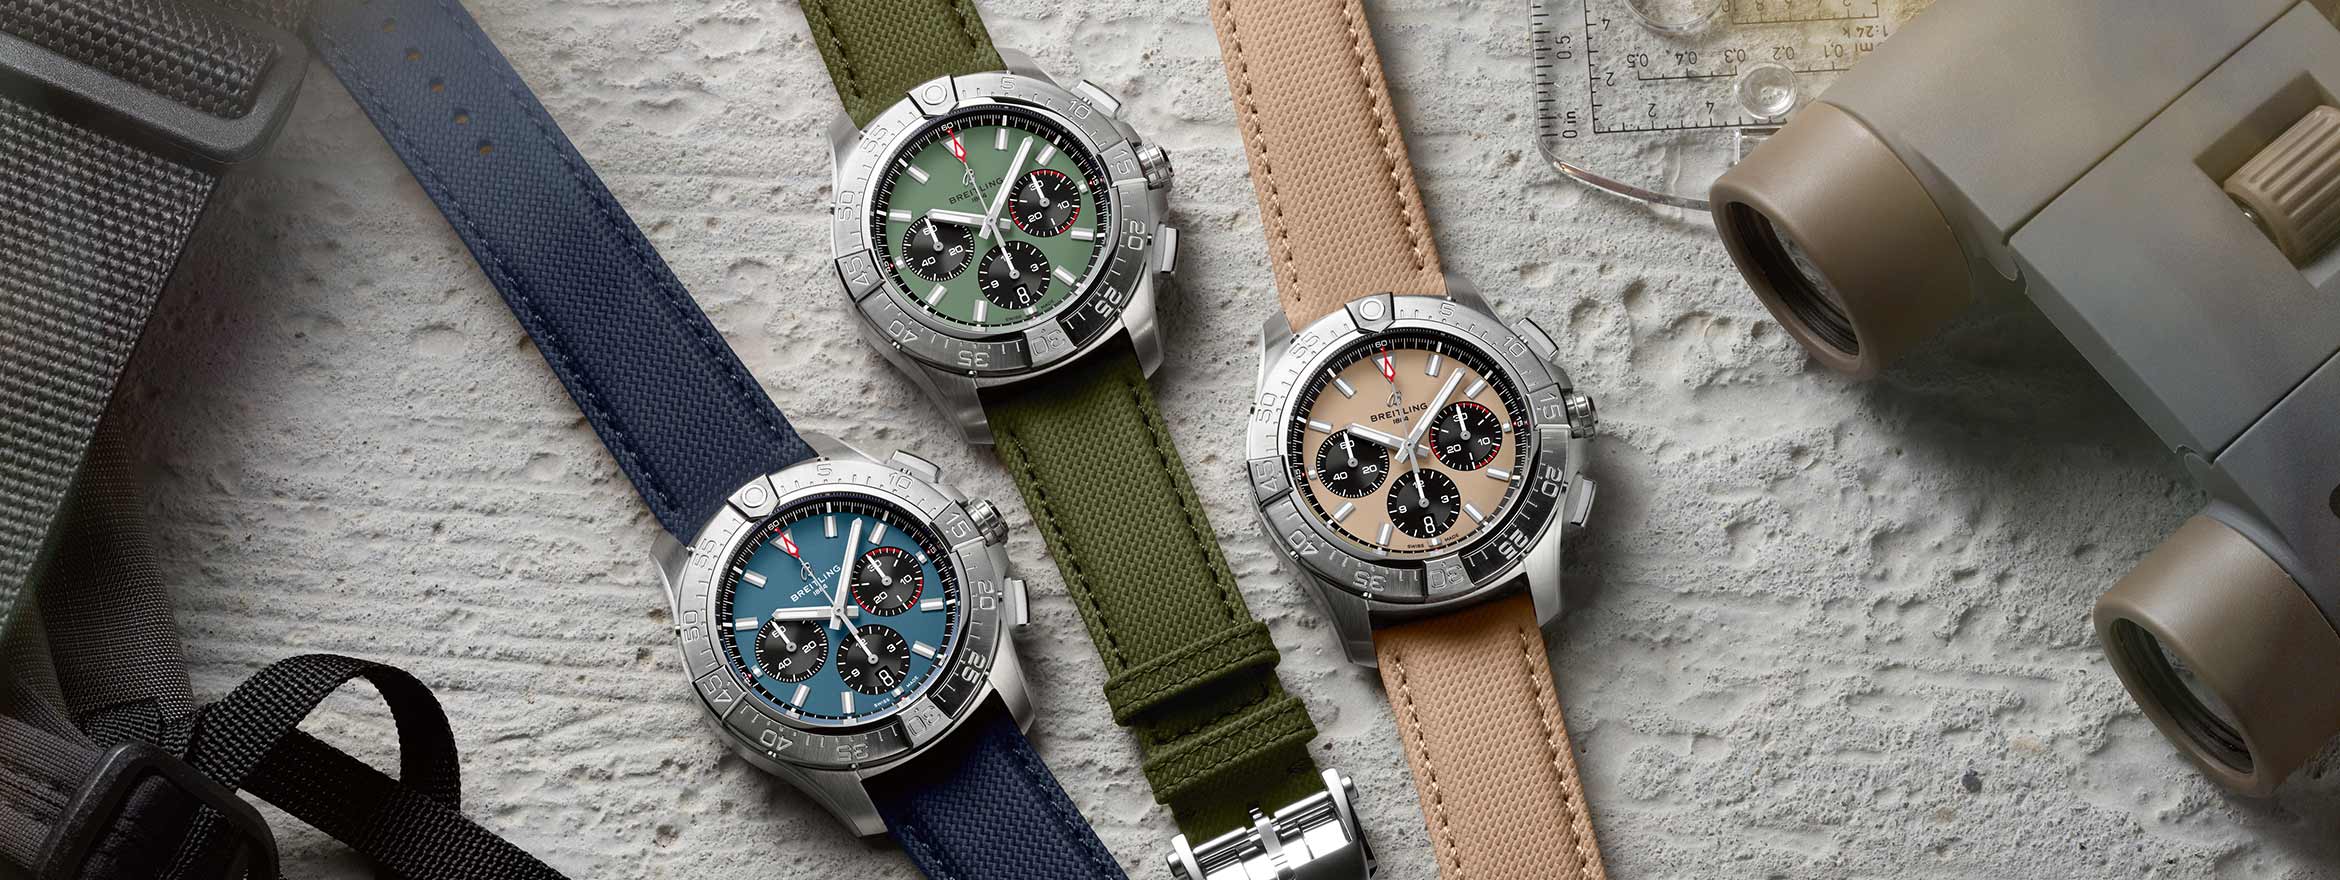 Breitling’s newly redesigned Avenger collection has landed